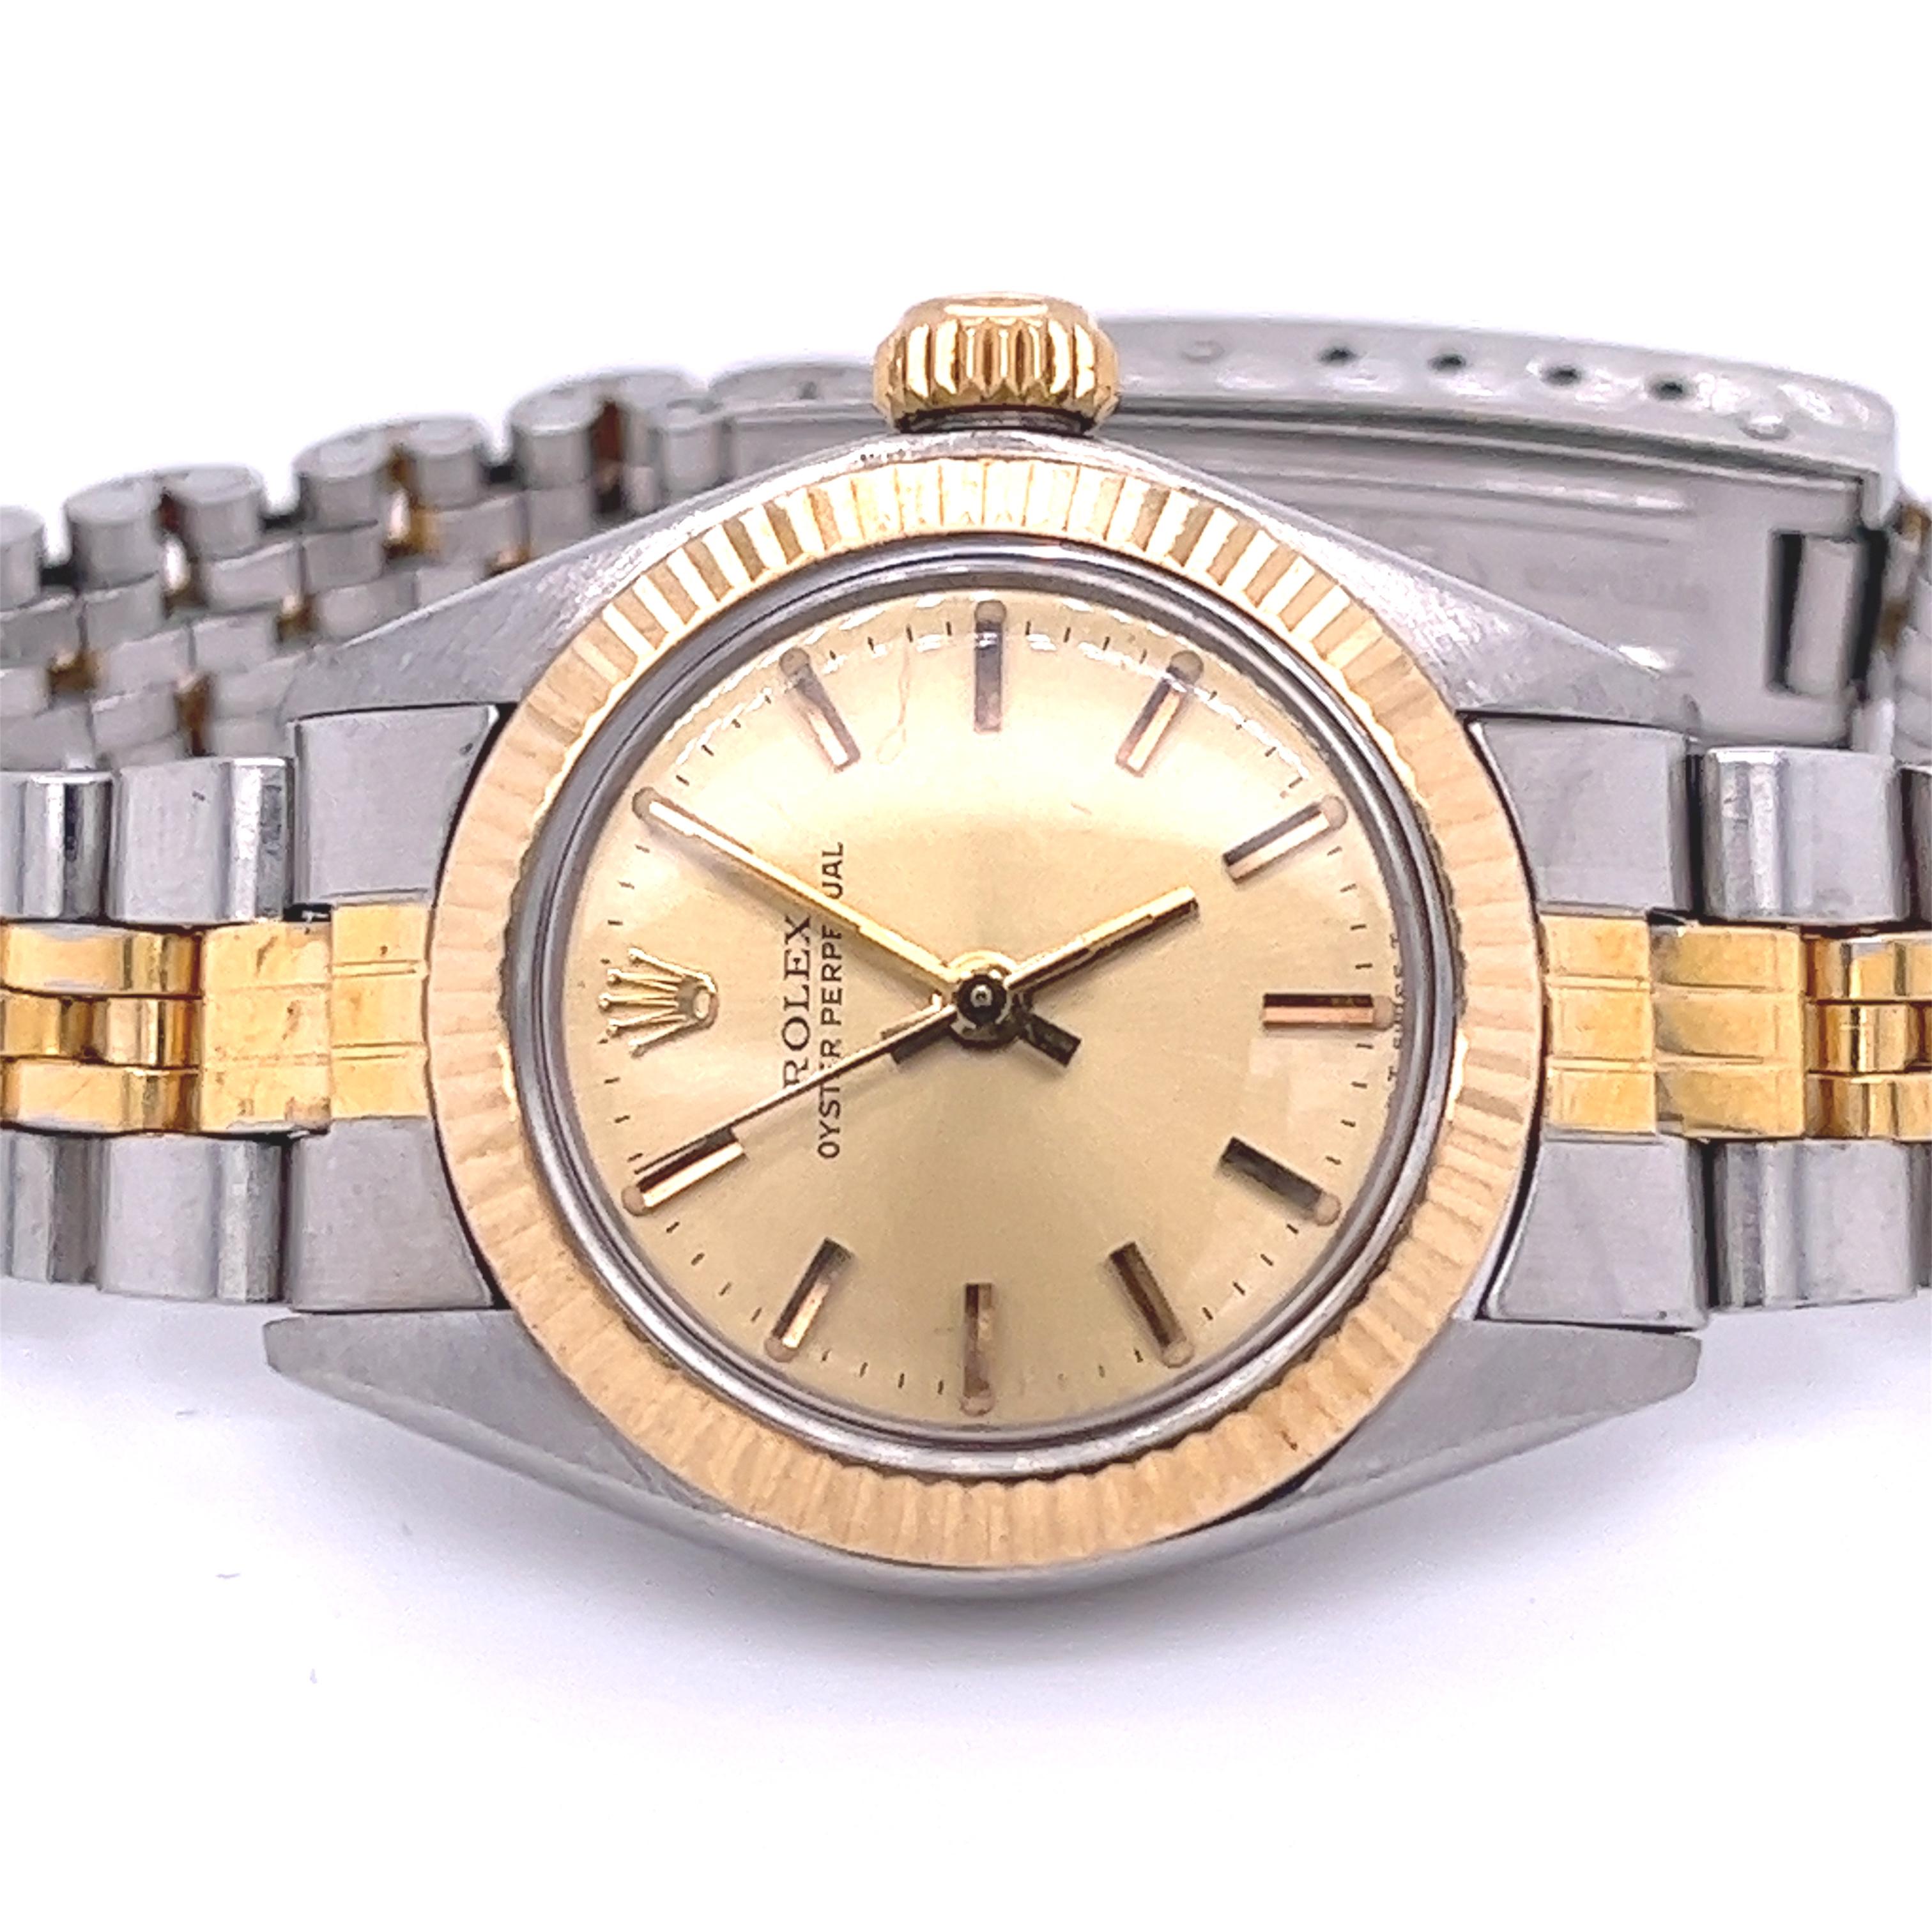 Beautiful Rolex Oyster Perpetual ladies wristwatch with Tudor Strap. An extravagant, yet sleek watch that echos a statement of refined taste and class. Sturdy enough for everyday wear and elegant enough for all special occasions.

This watch bears